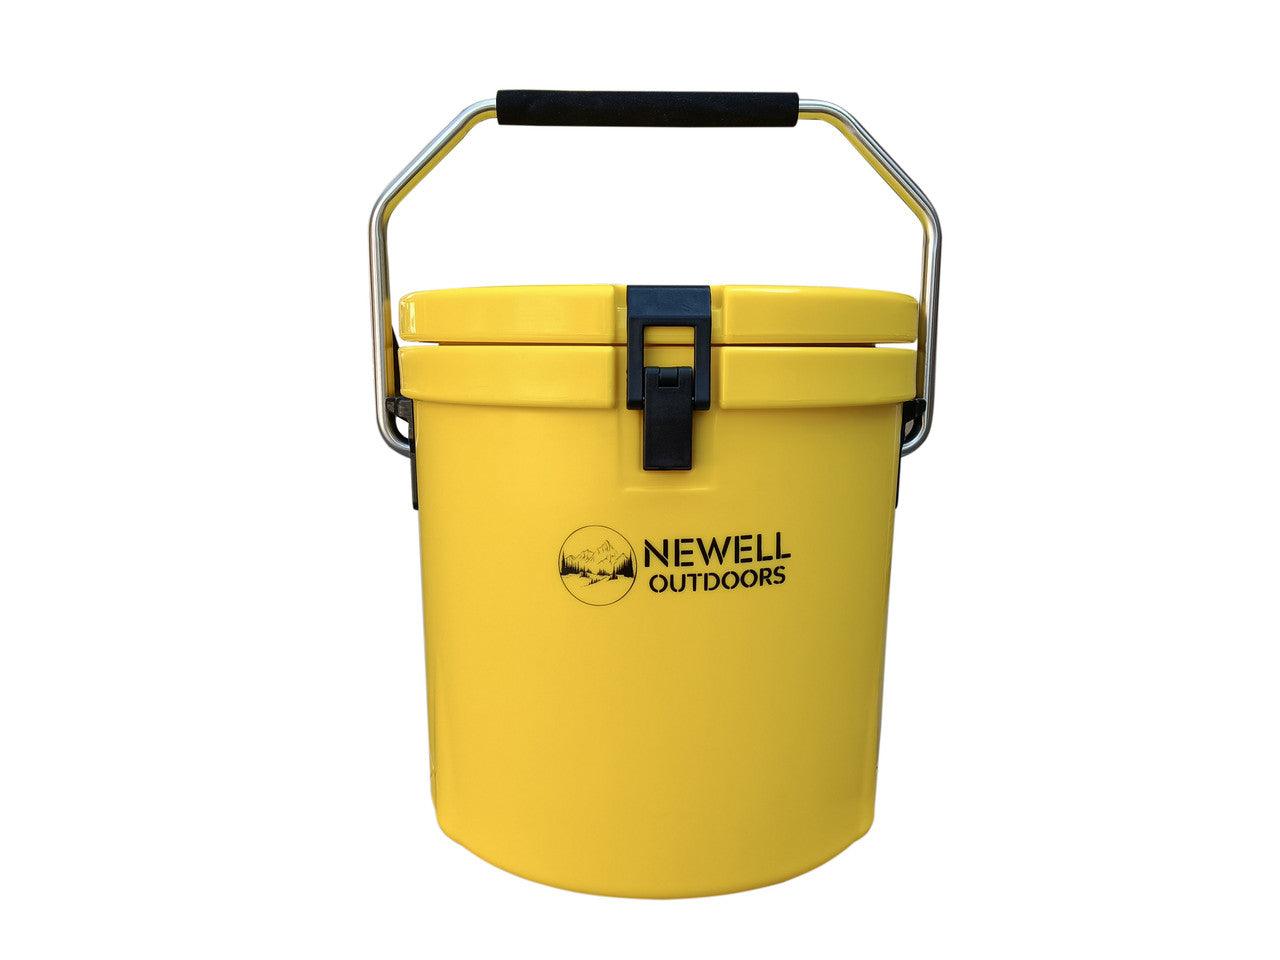 The Neweller Twelve in Yellow with a Handle - Newell Outdoors